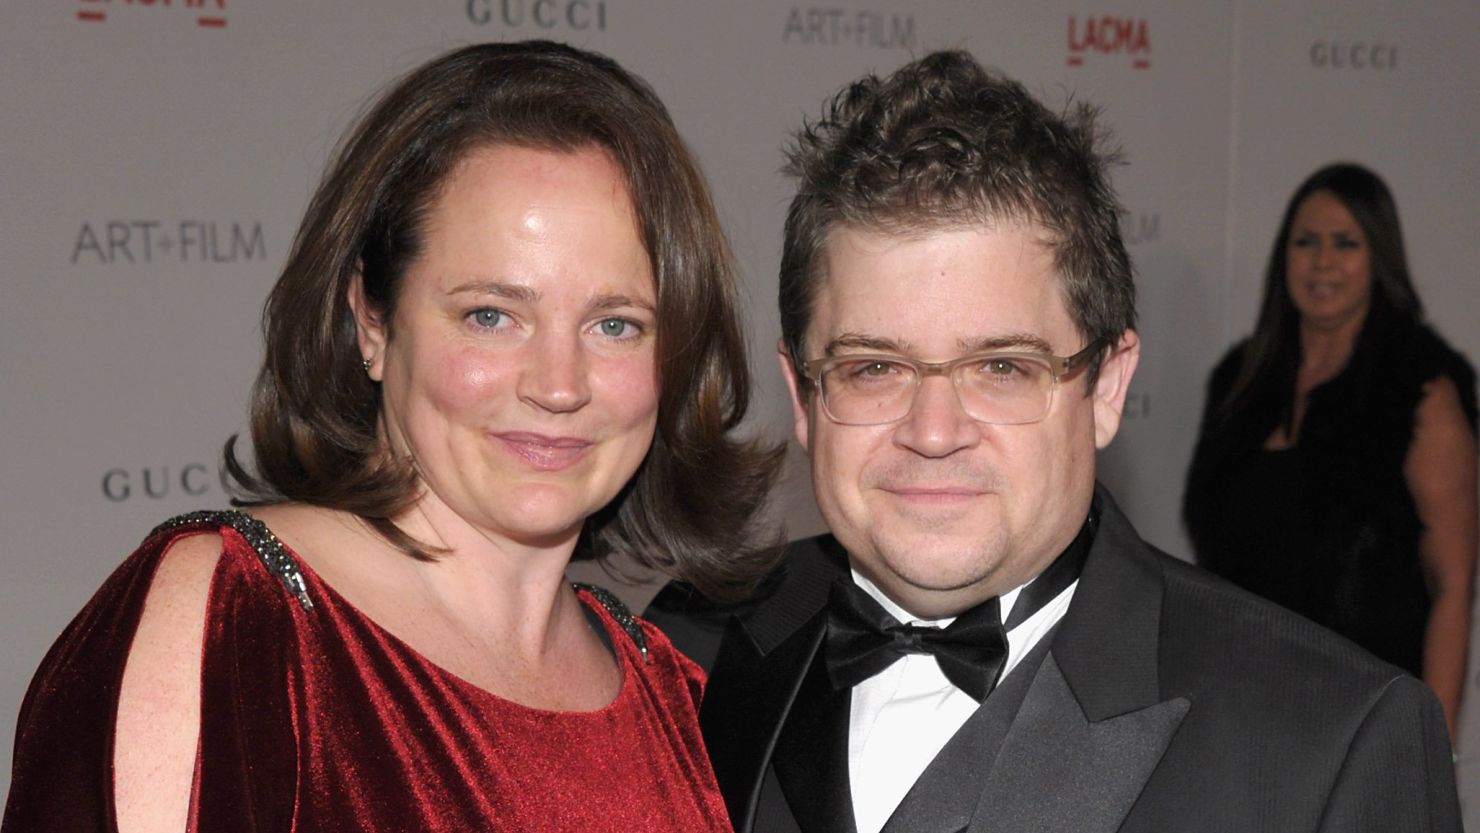 Michelle McNamara and Patton Oswalt in 2011. (Photo by John Shearer/Getty Images for LACMA)